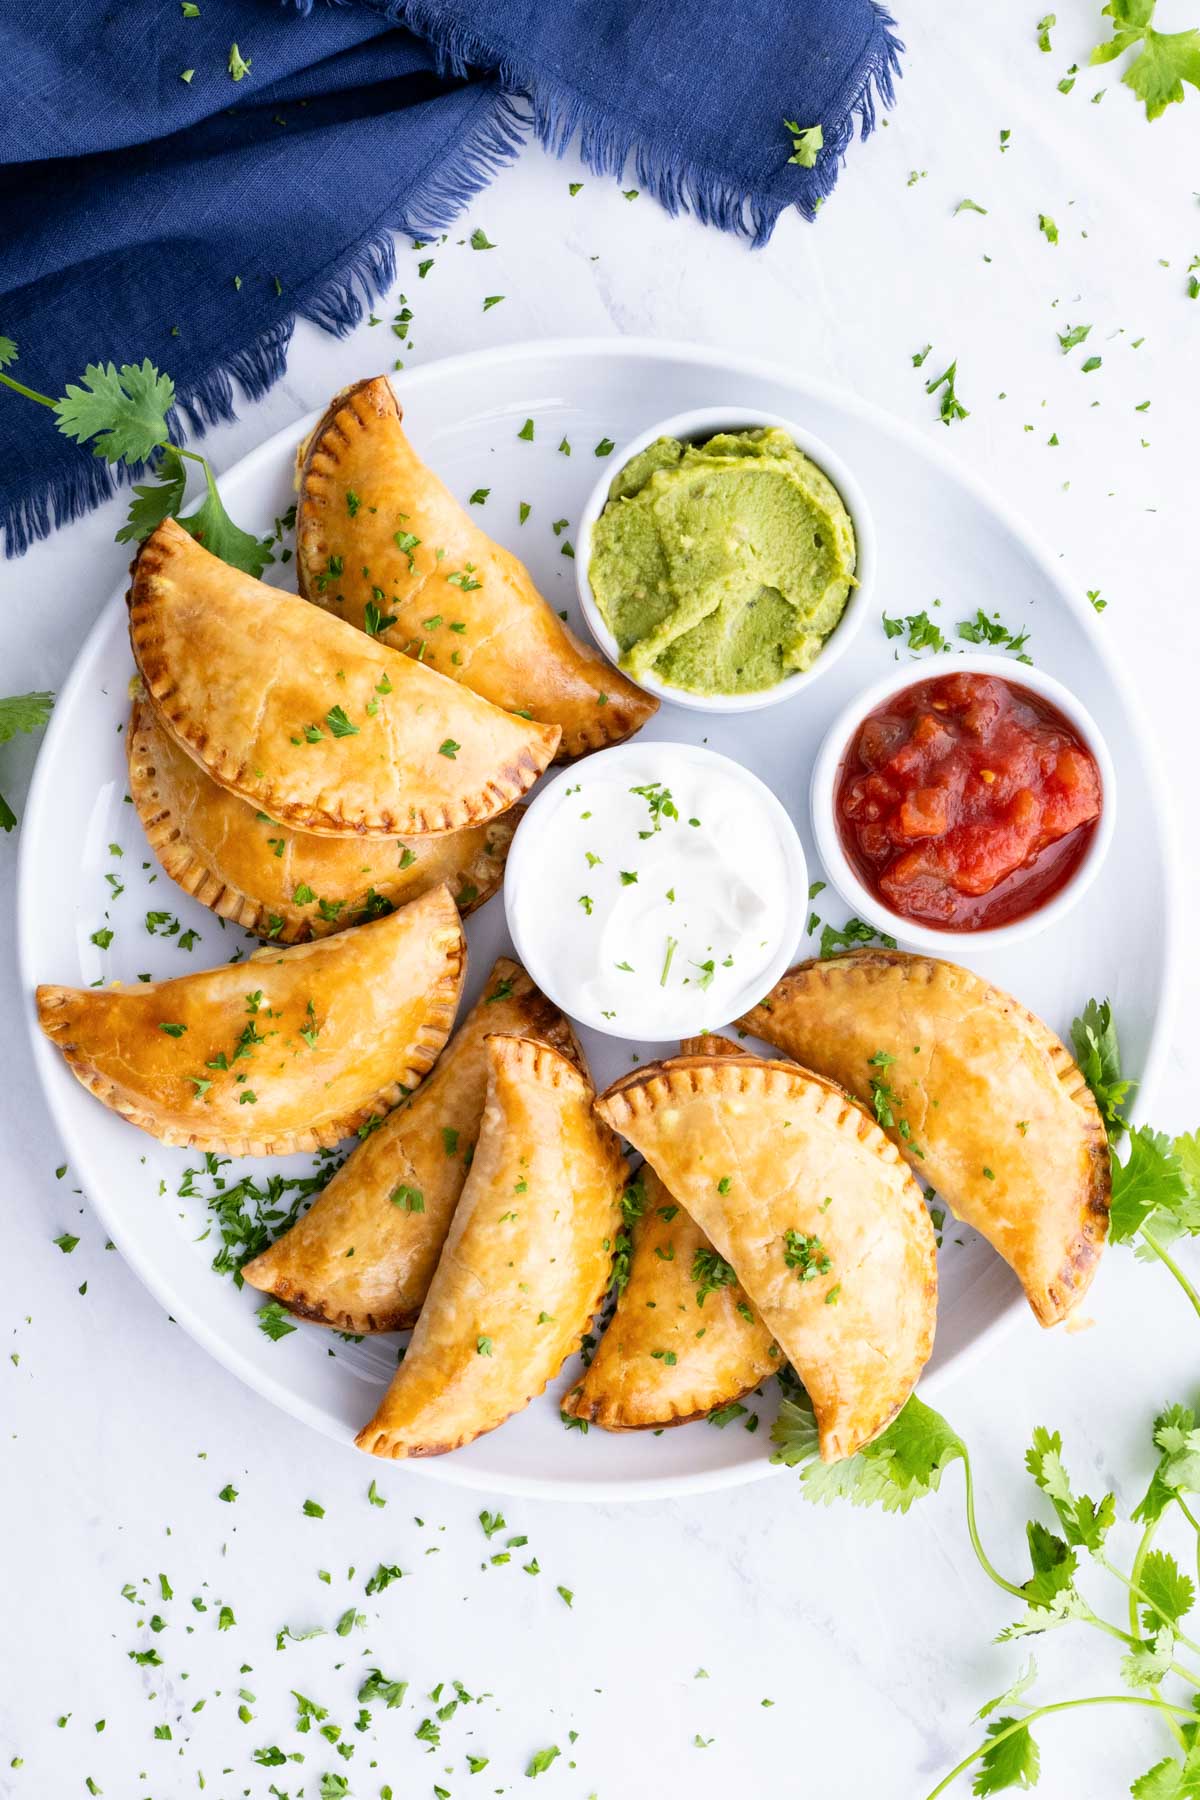 Empanadas are served on a plate with salsa, sour cream, and guacamole.